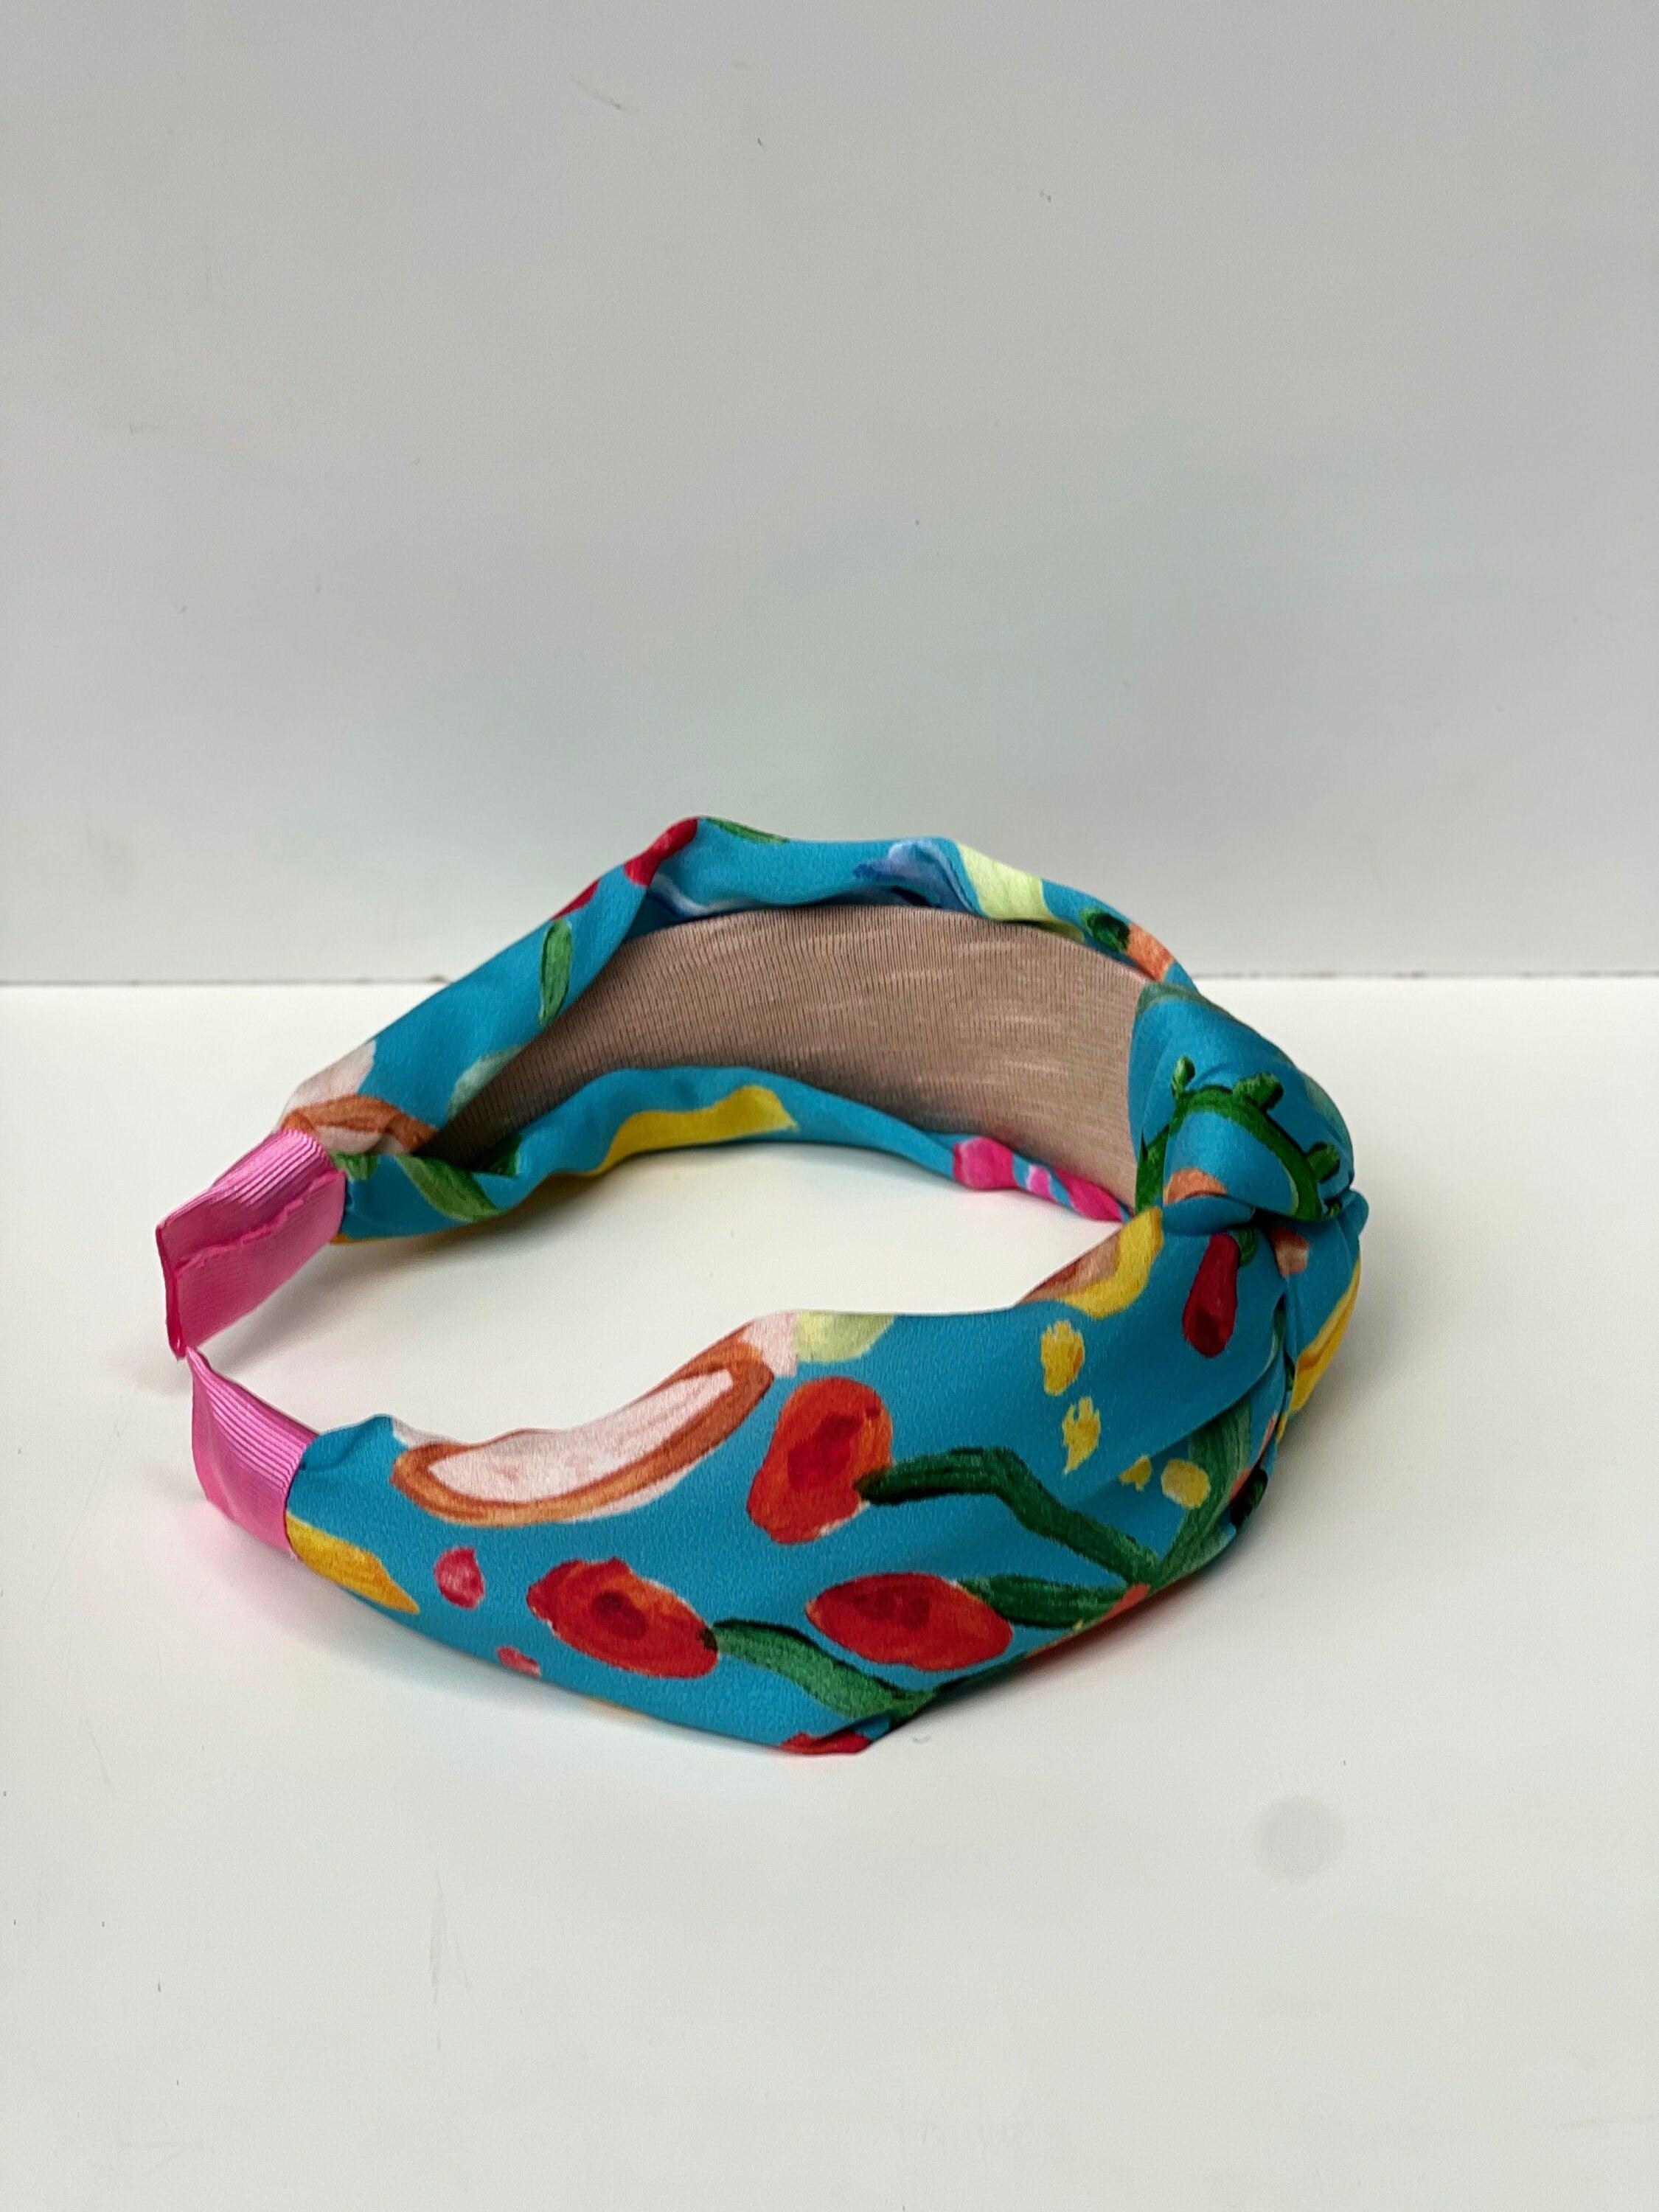 Handcrafted Colorful Knotted Headband with Flower Pattern - Stylish Women's Hairband in Blue, Orange, Pink, and Green available at Moyoni Design